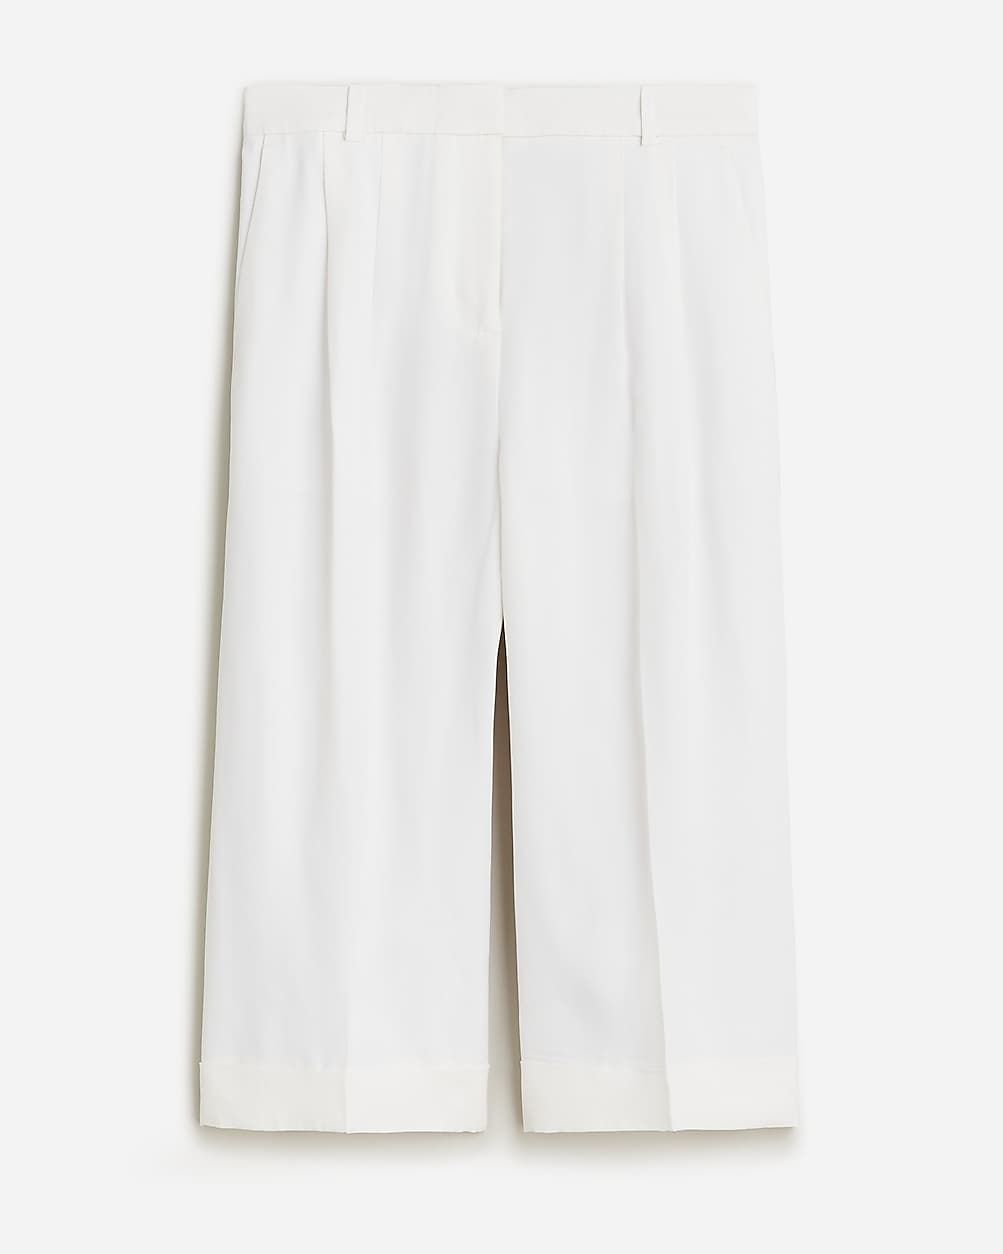 Shop this lookSPRING LOOKBOOK4.3(4 REVIEWS)Long pleated trouser short in drapey viscose$168.00Sel... | J.Crew US